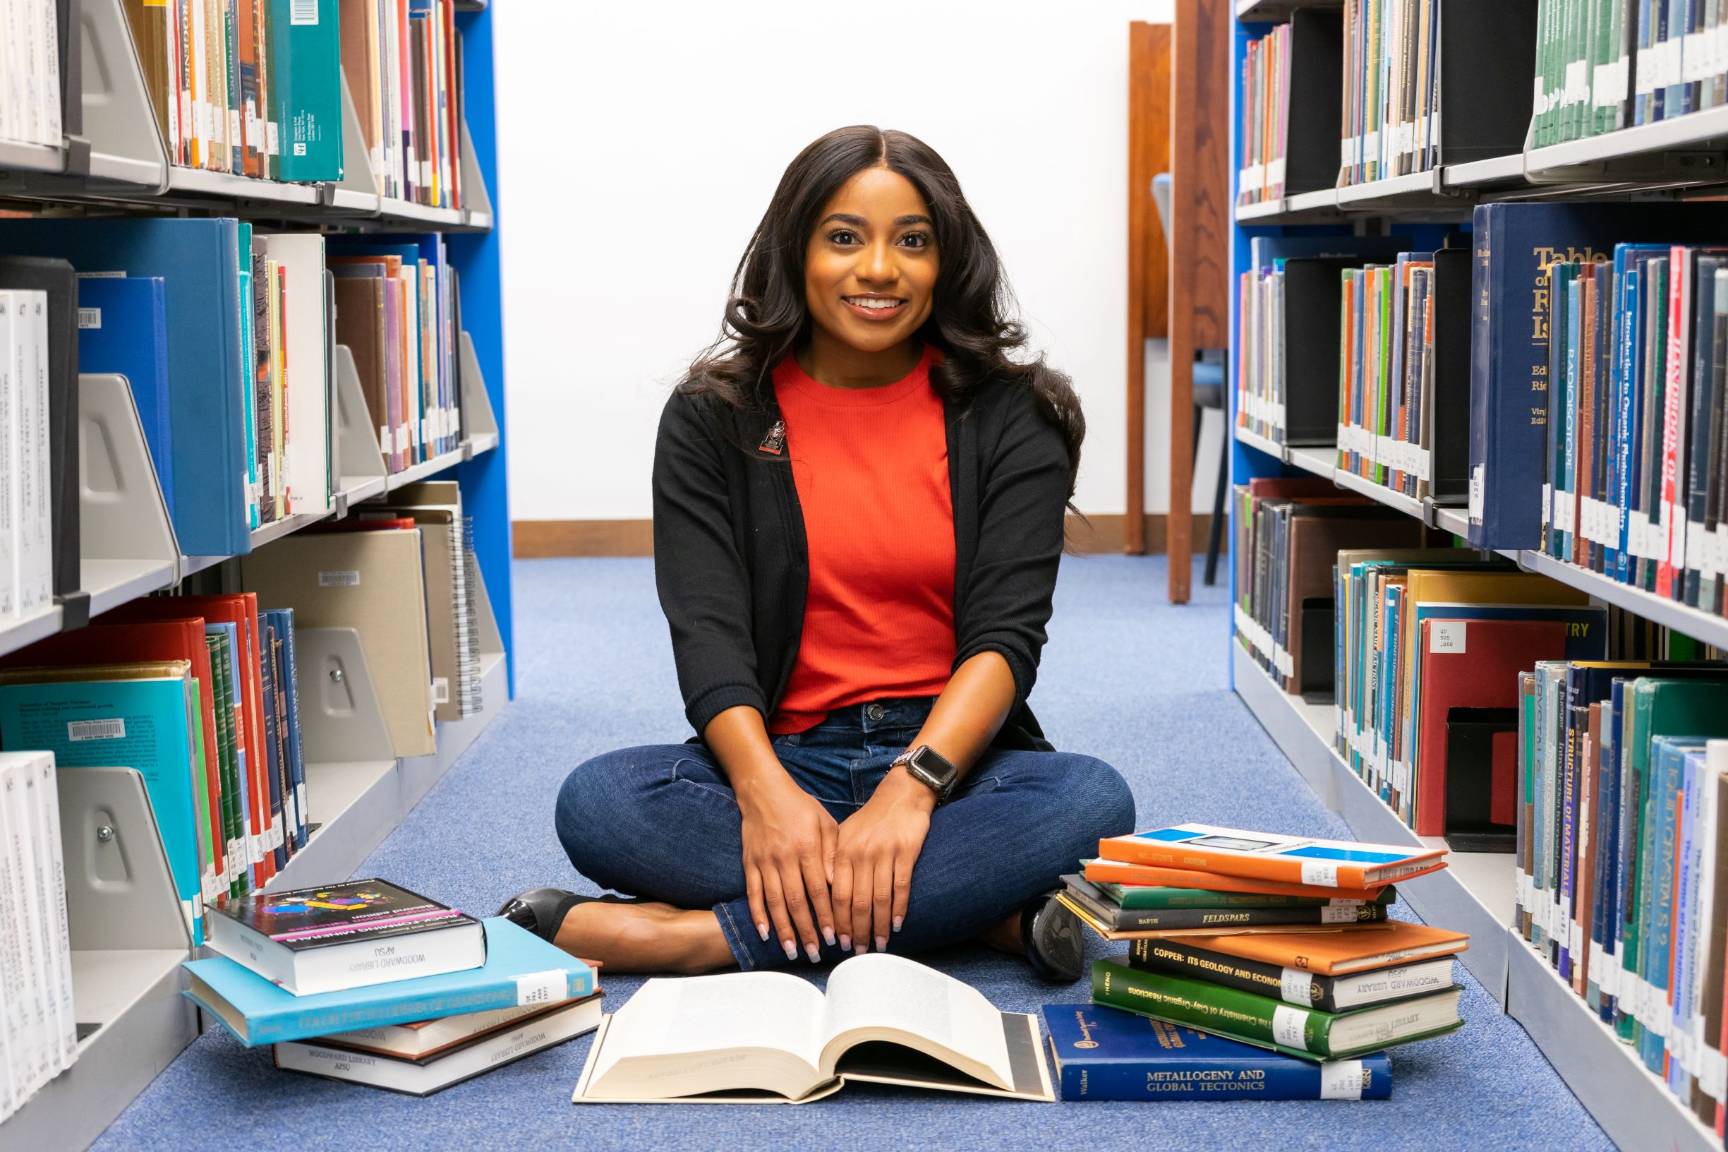 Student poses for photo in library